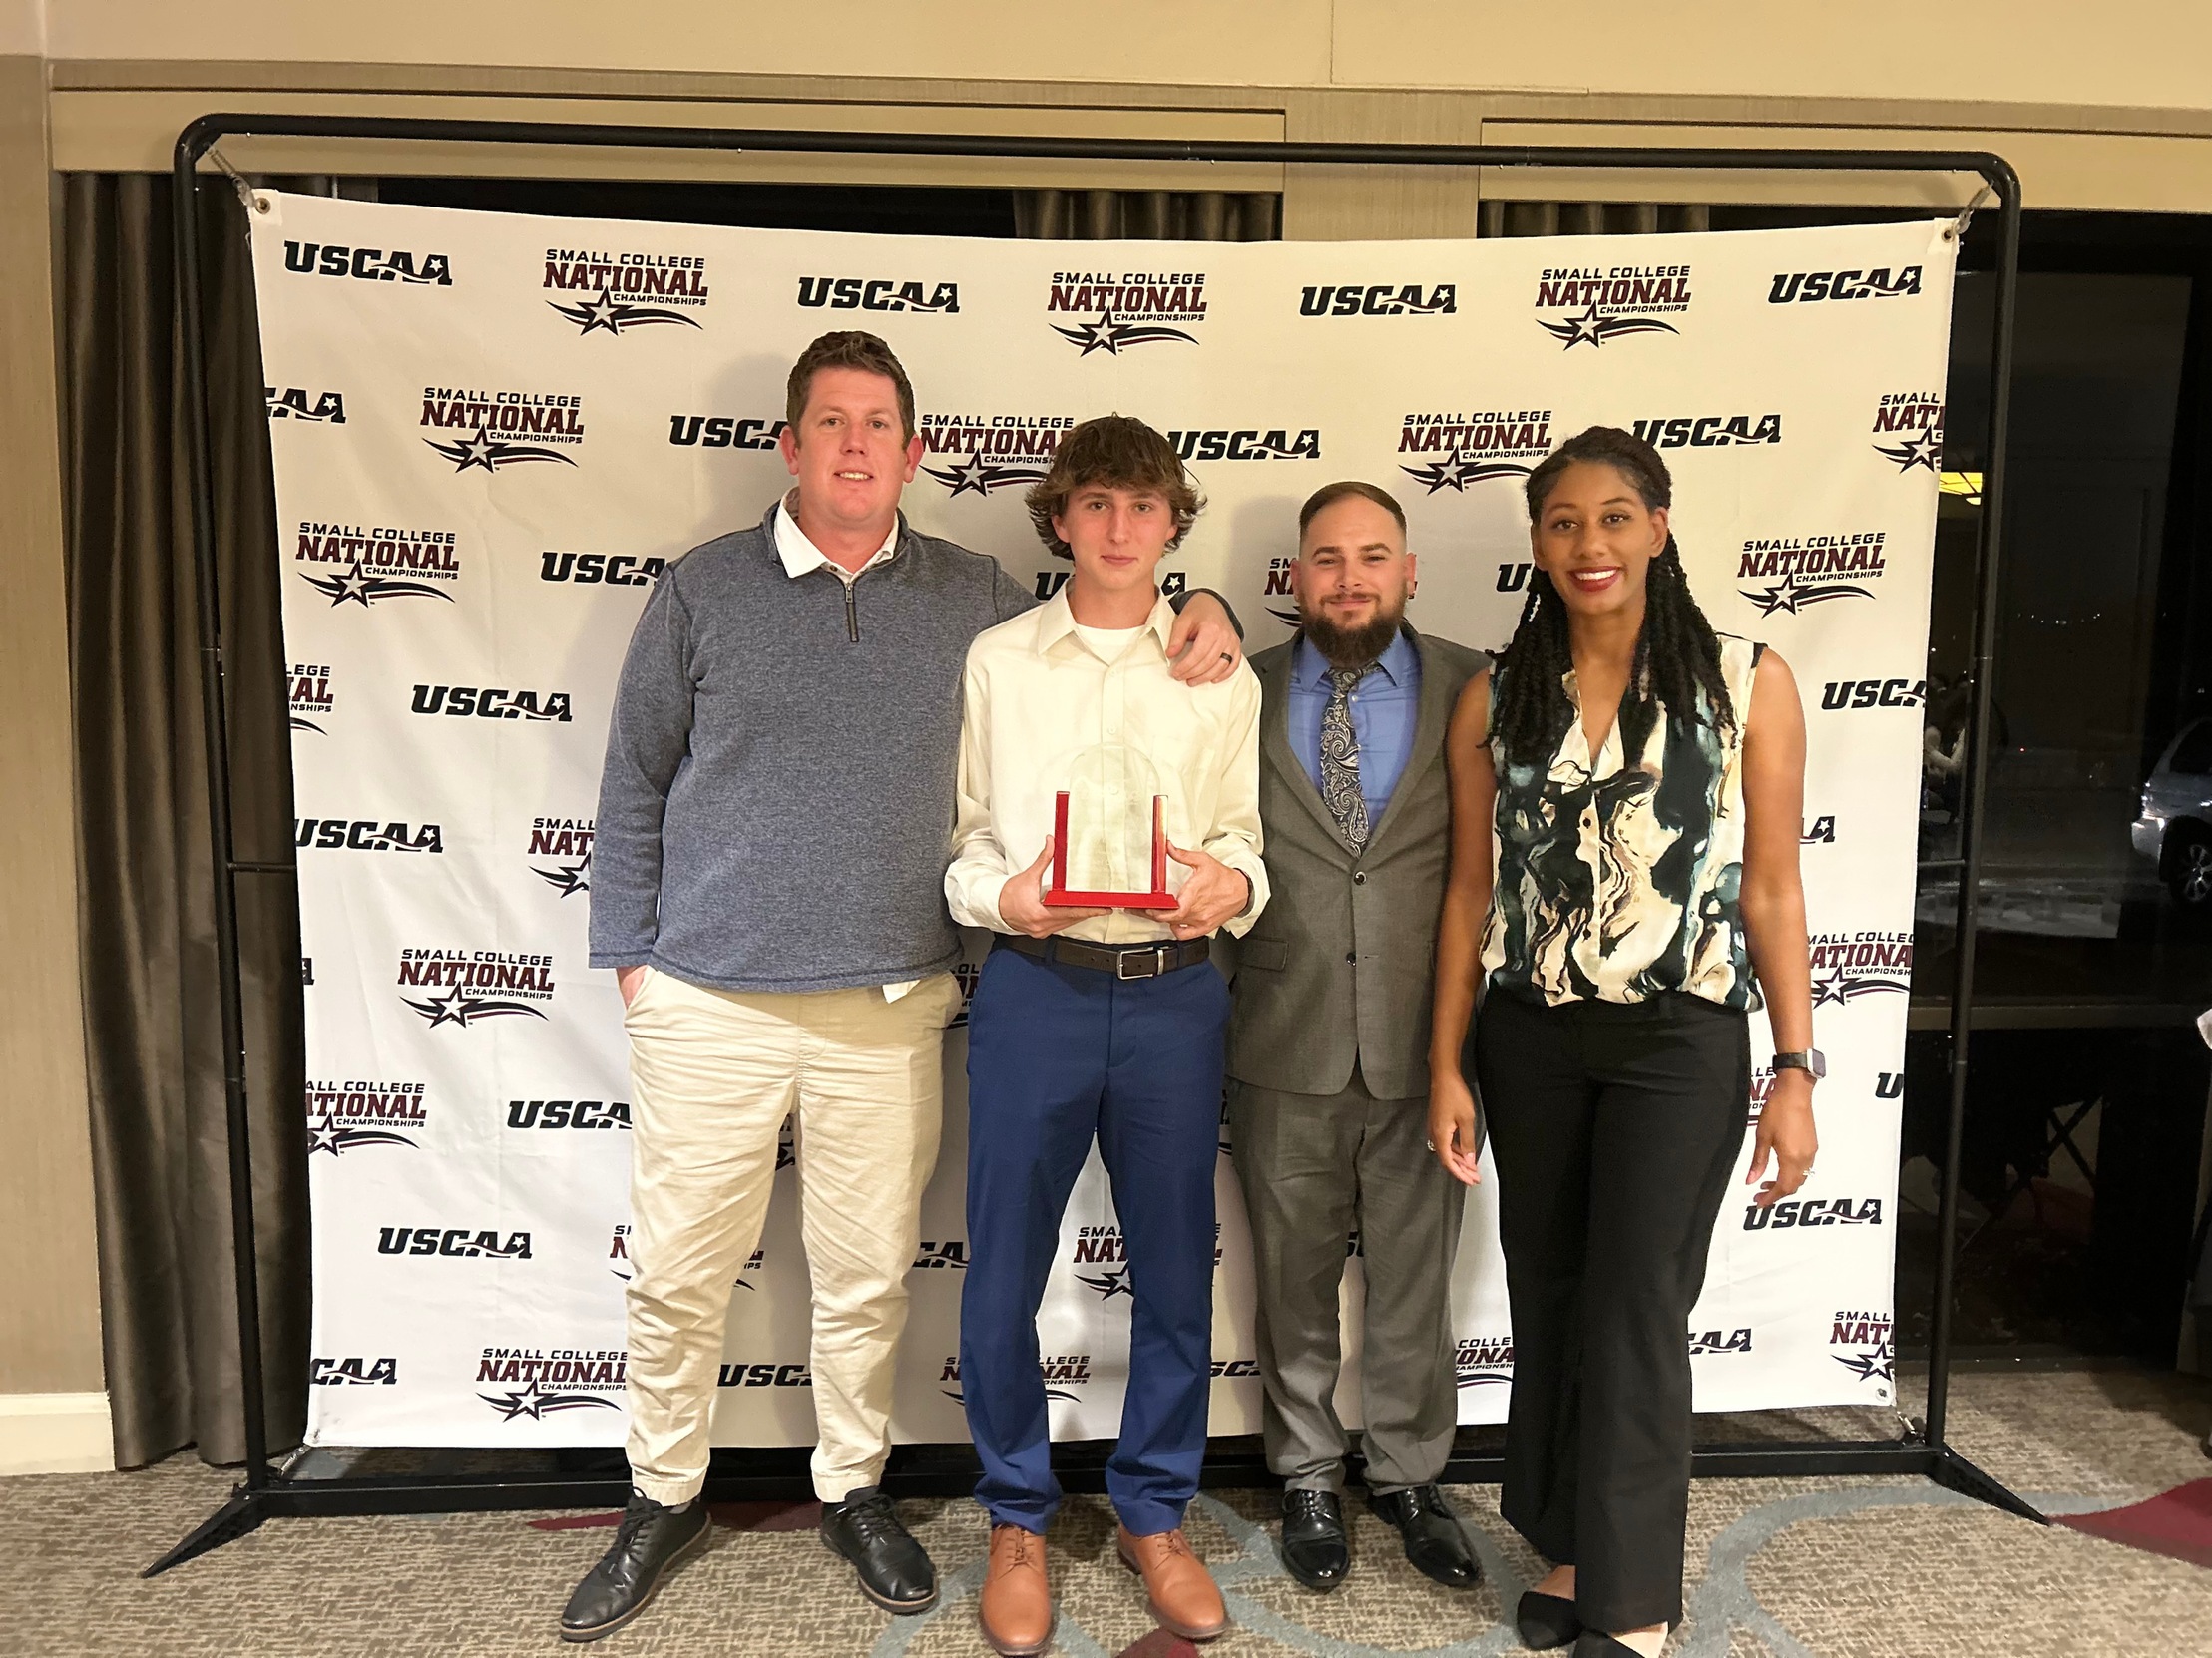 Left to Right: Coach Mark Duffield, Michael "Mac" Chaloupka, Steven Bressler (Assistant Athletic Director), and Dr. Renee Brown-Antonelli (Director of Athletics)